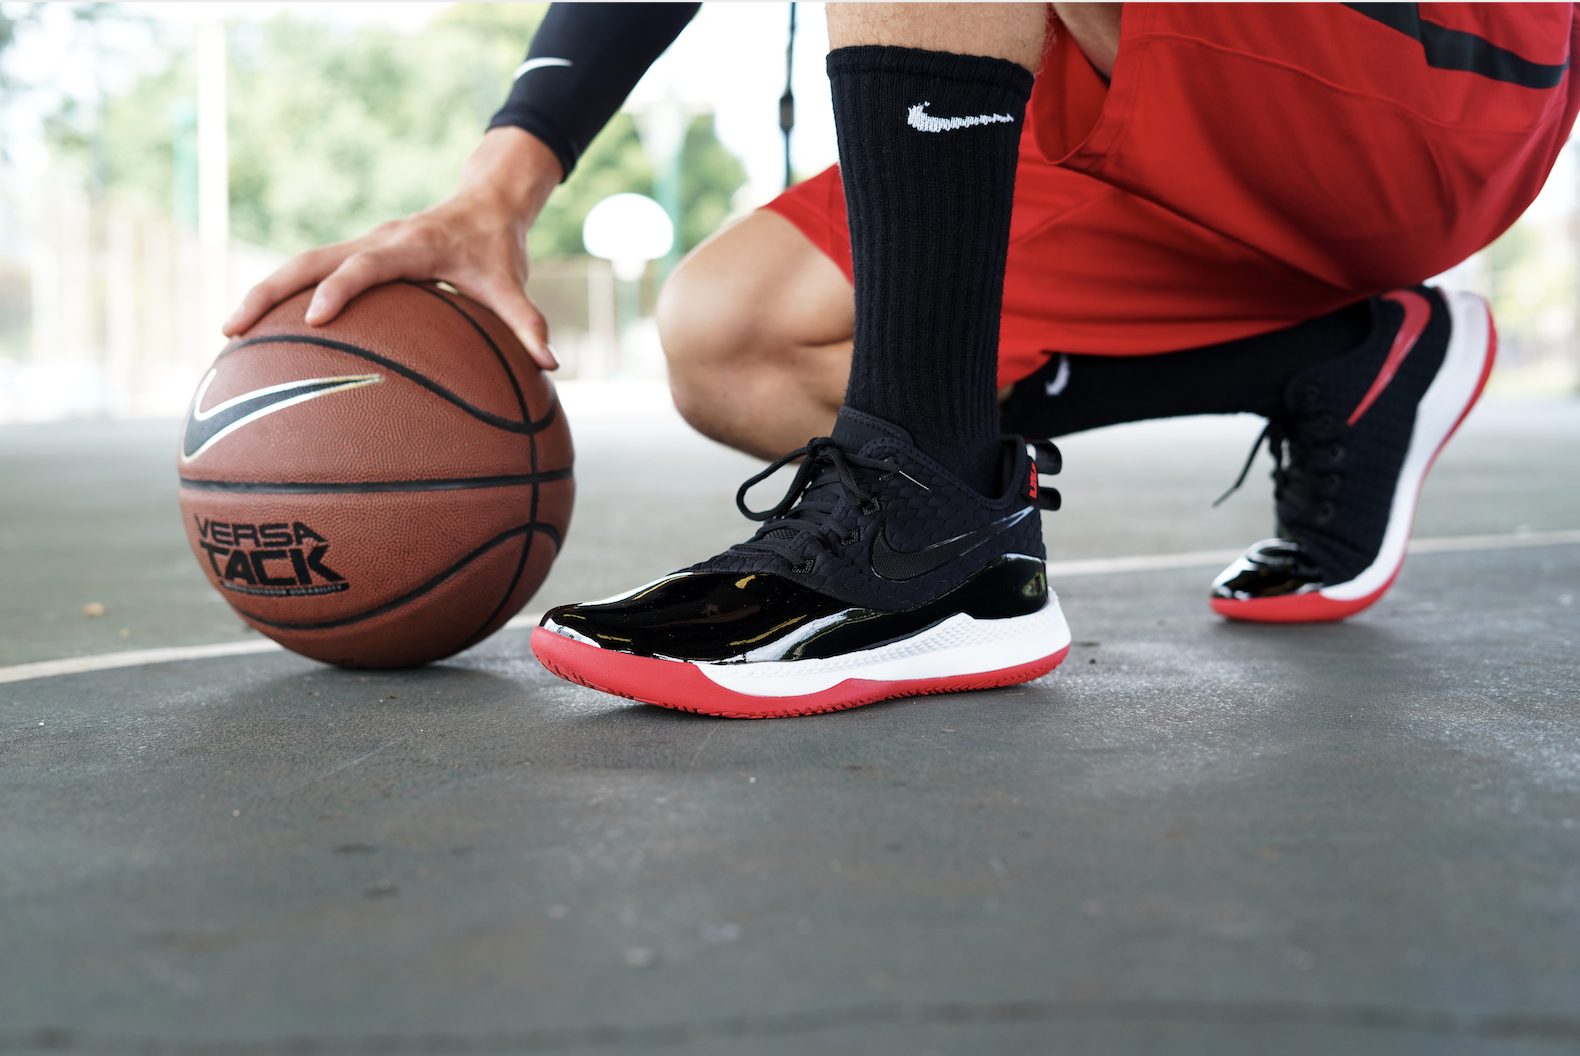 Top 5 Court-Ready Performance Basketball Shoes for Summer Hoops